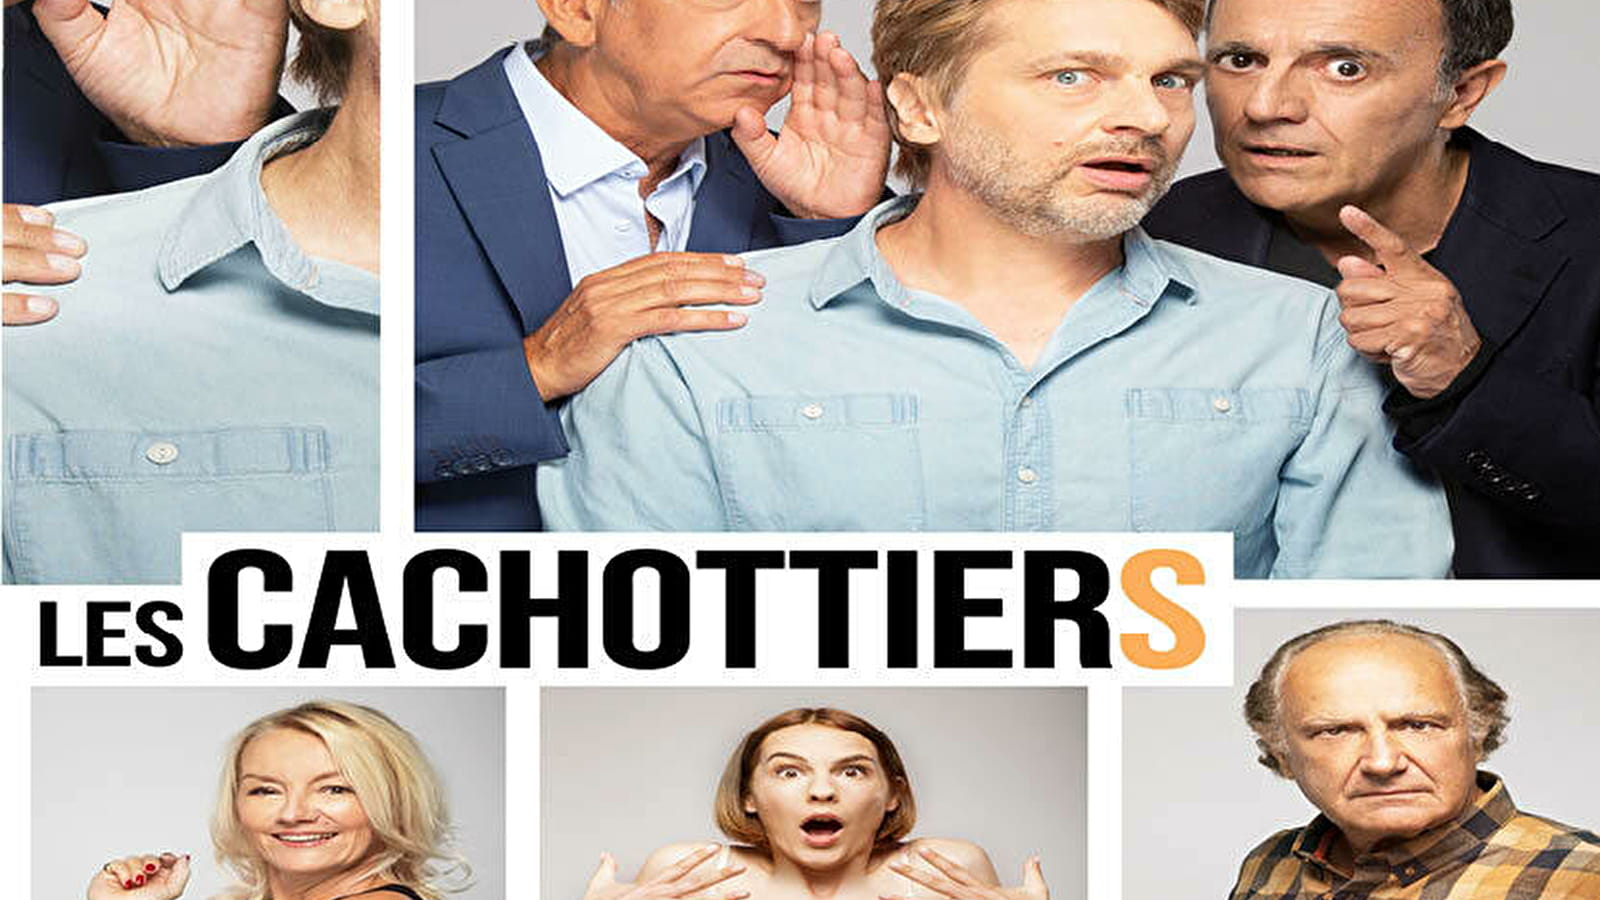 The Cachottiers